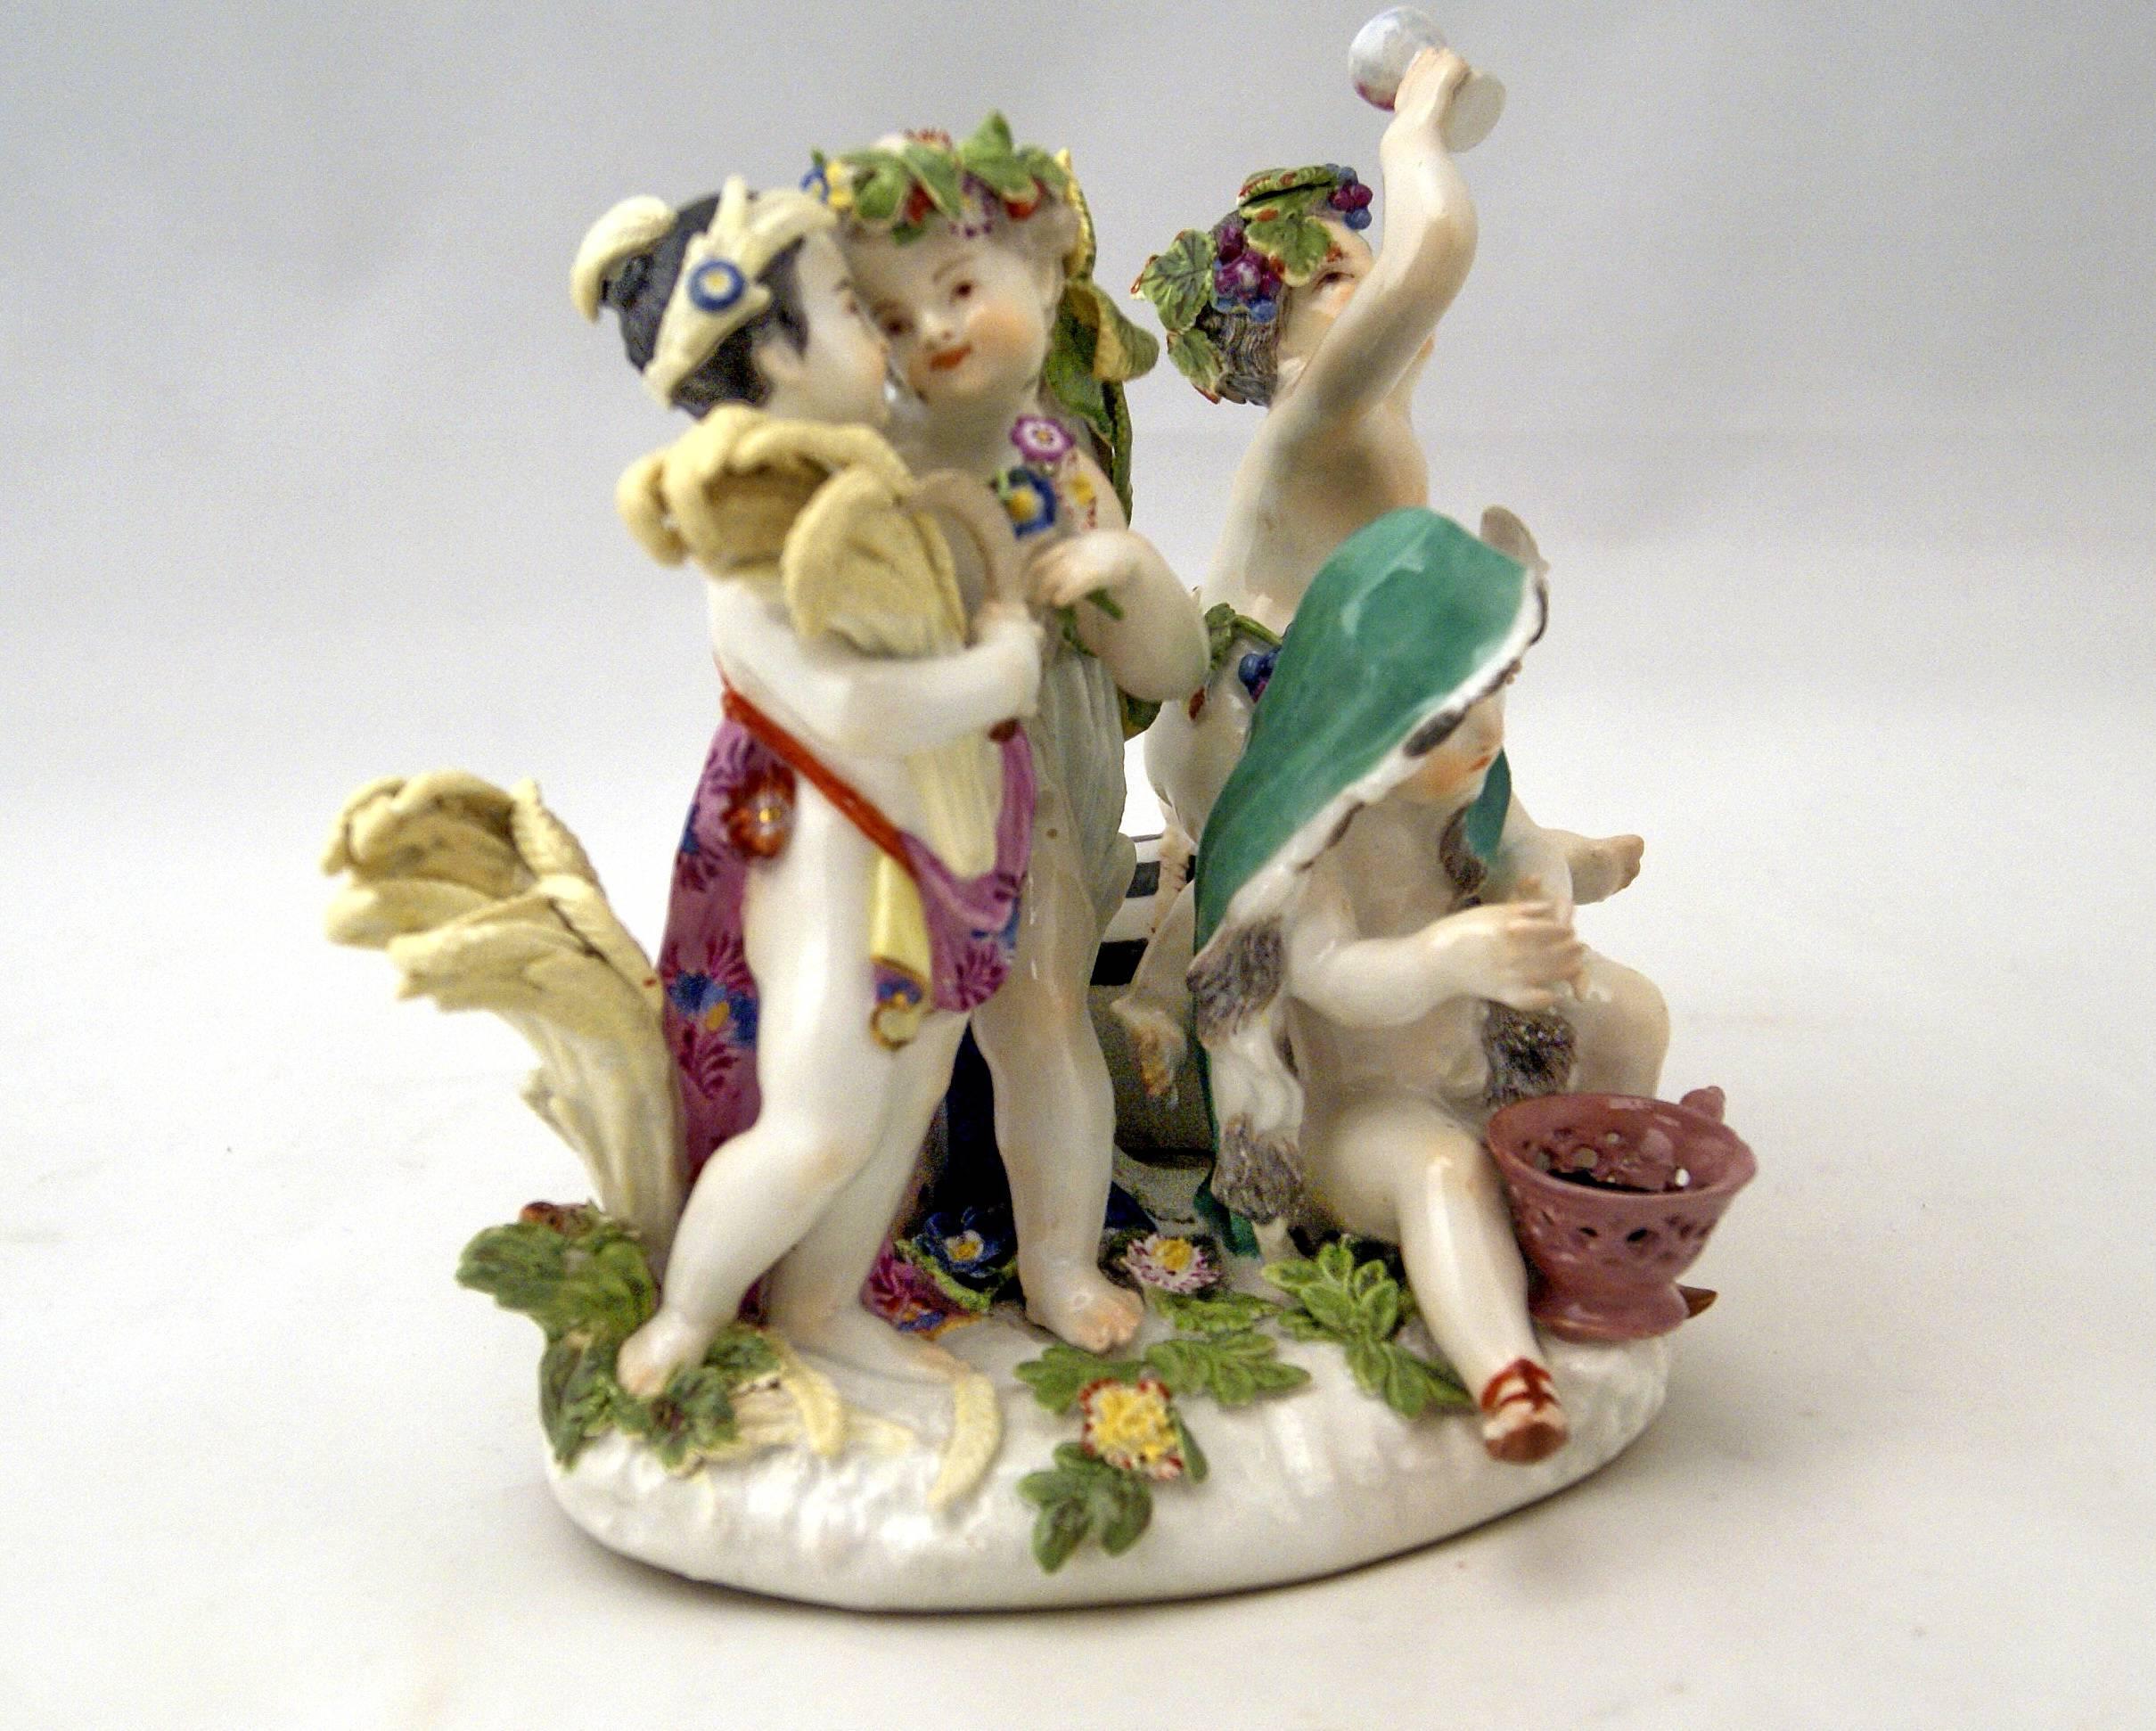 Meissen gorgeous figurine group of finest quality:
There are four cherubs symbolizing the four seasons - of most lovely appearance visible.

Manufactory: Meissen
Dating (please note!):  Middle of 18th century, made circa 1755-60.
Marks:
Small blue